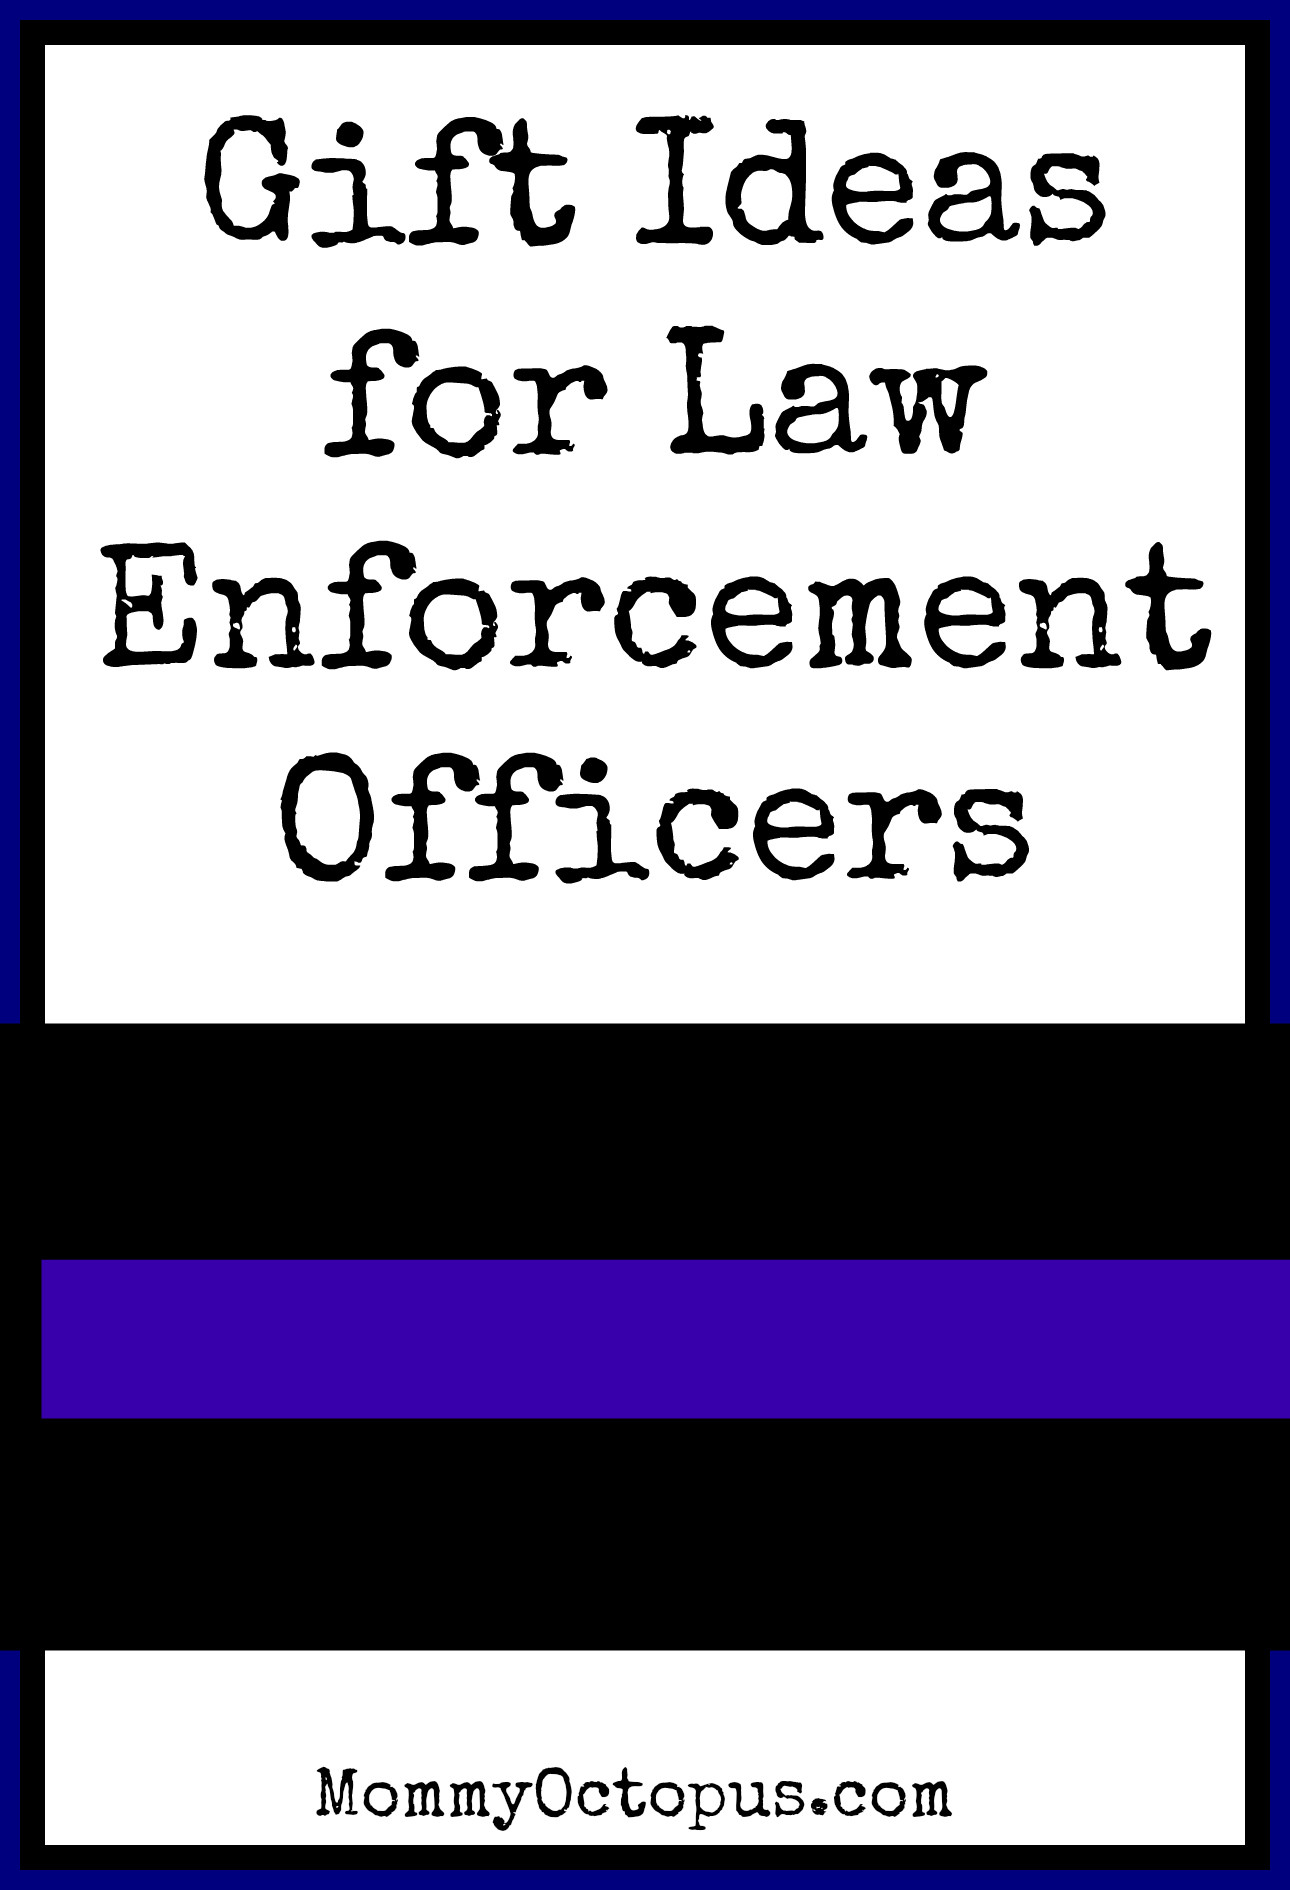 Law Enforcement Gift Ideas
 Christmas Gift Ideas for Law Enforcement ficers Mommy